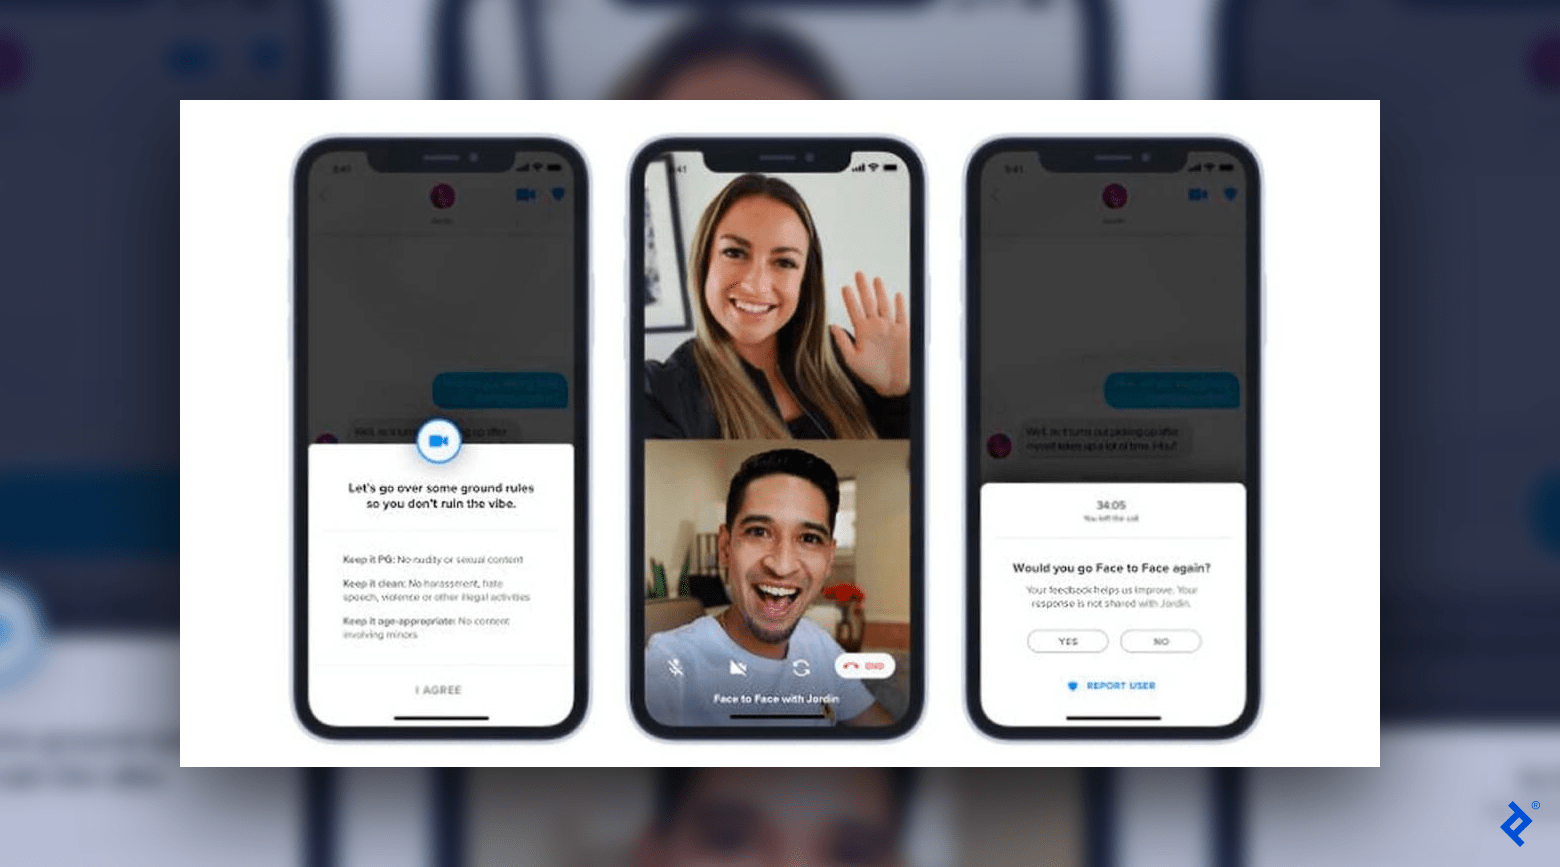 Two Tinder users can initiate a Face to Face chat on the app without having to exchange personal contact information or meet in person.